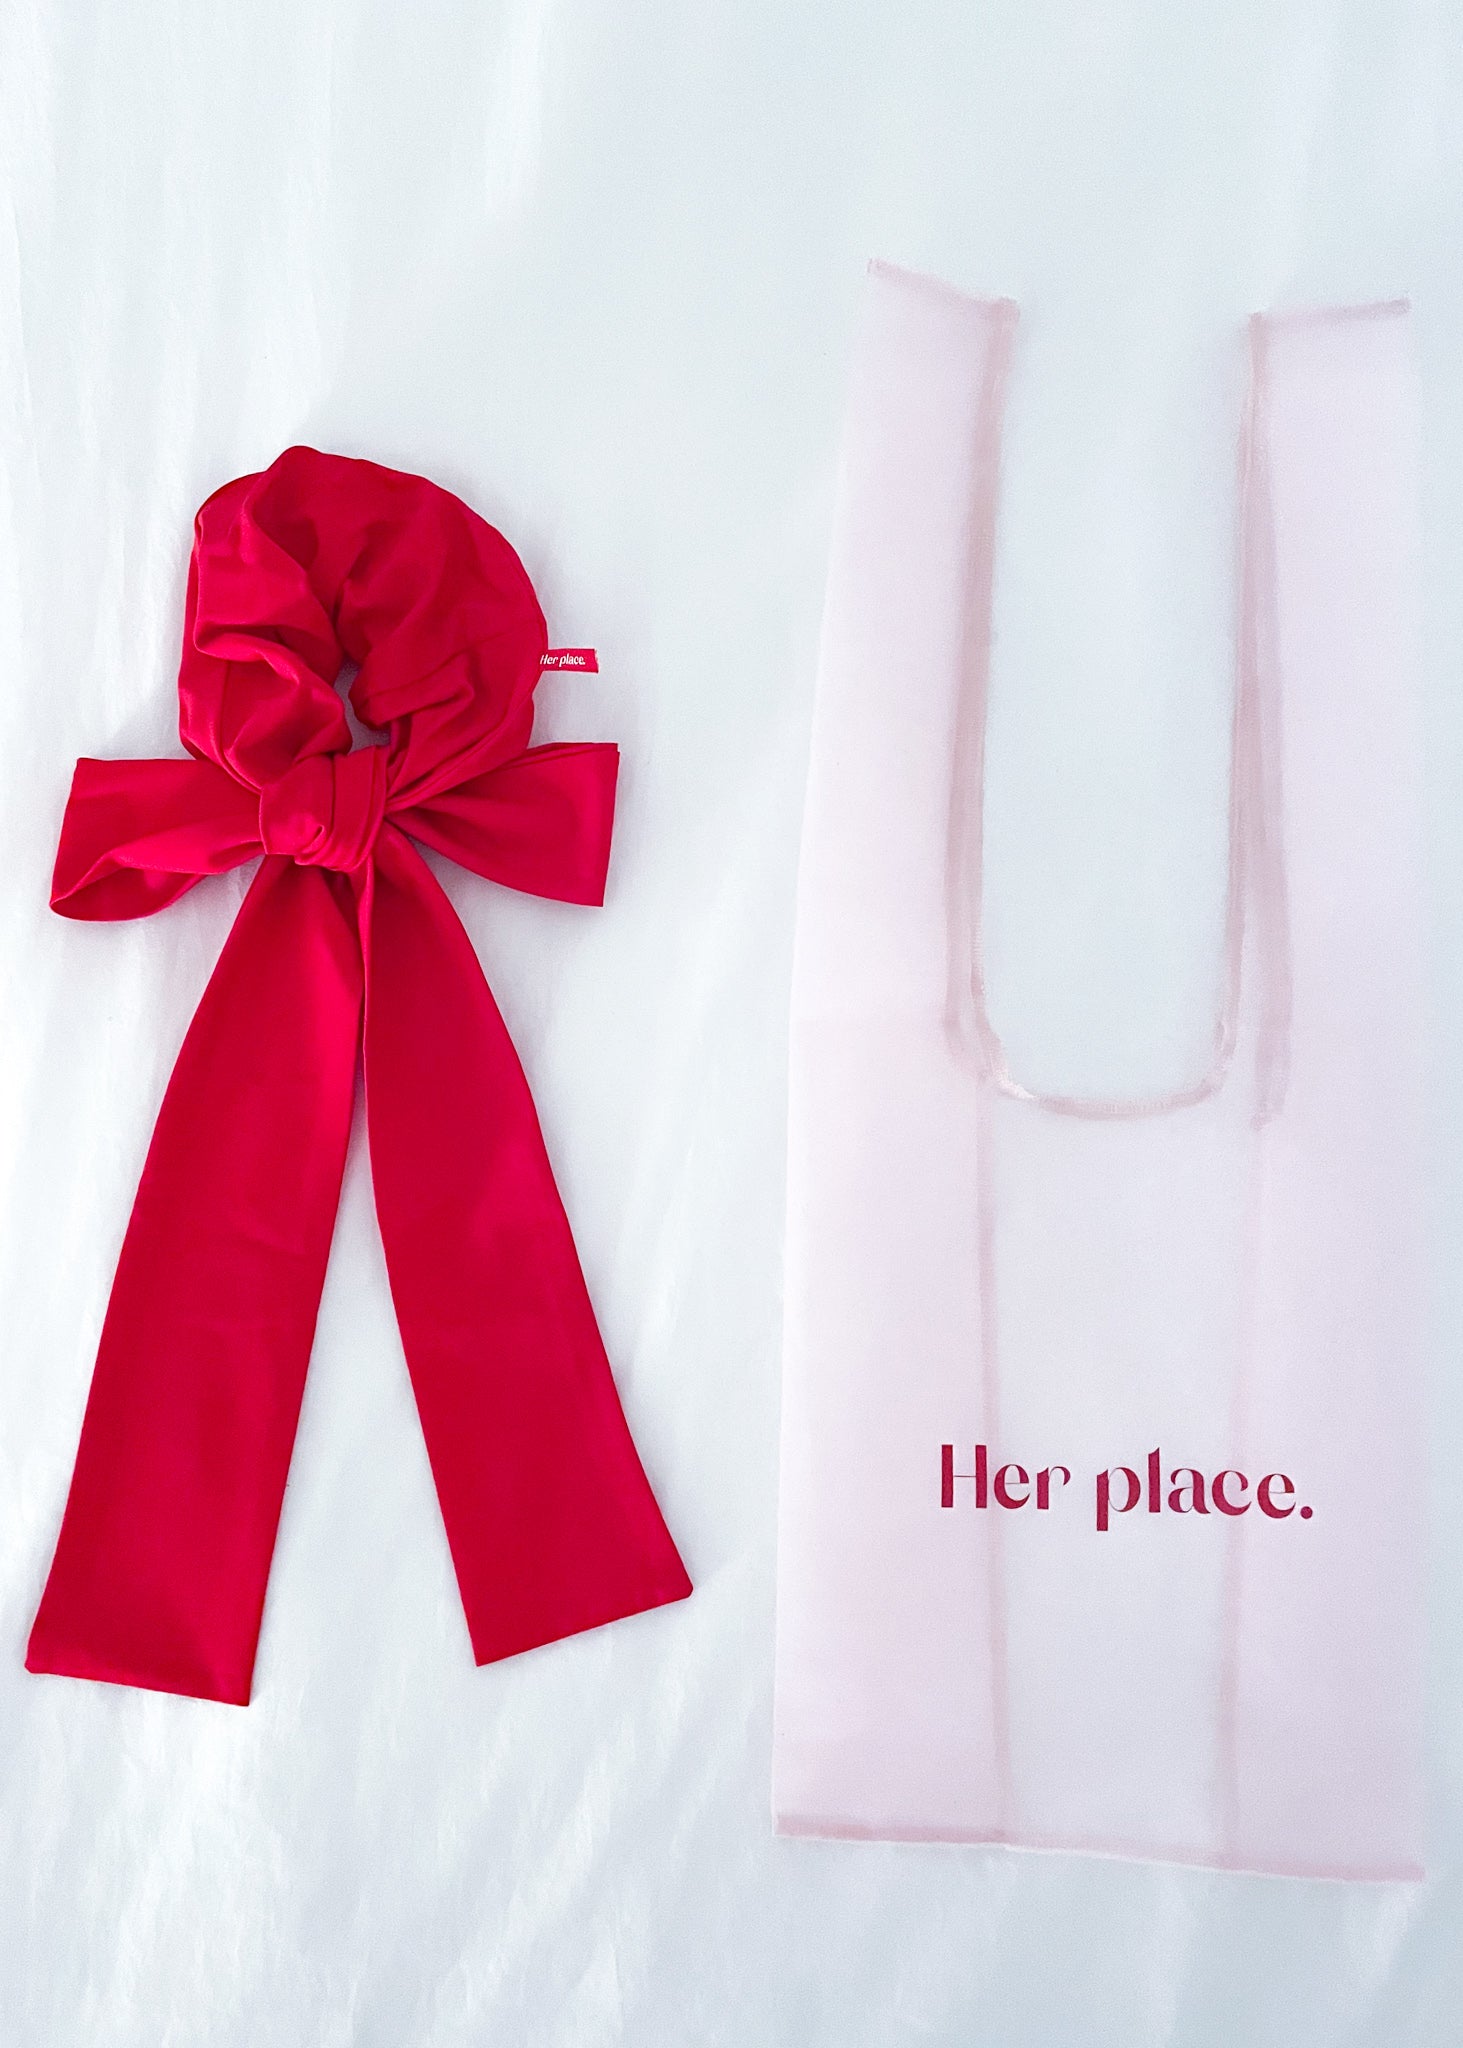 Beverly's ribbon. – Her place.